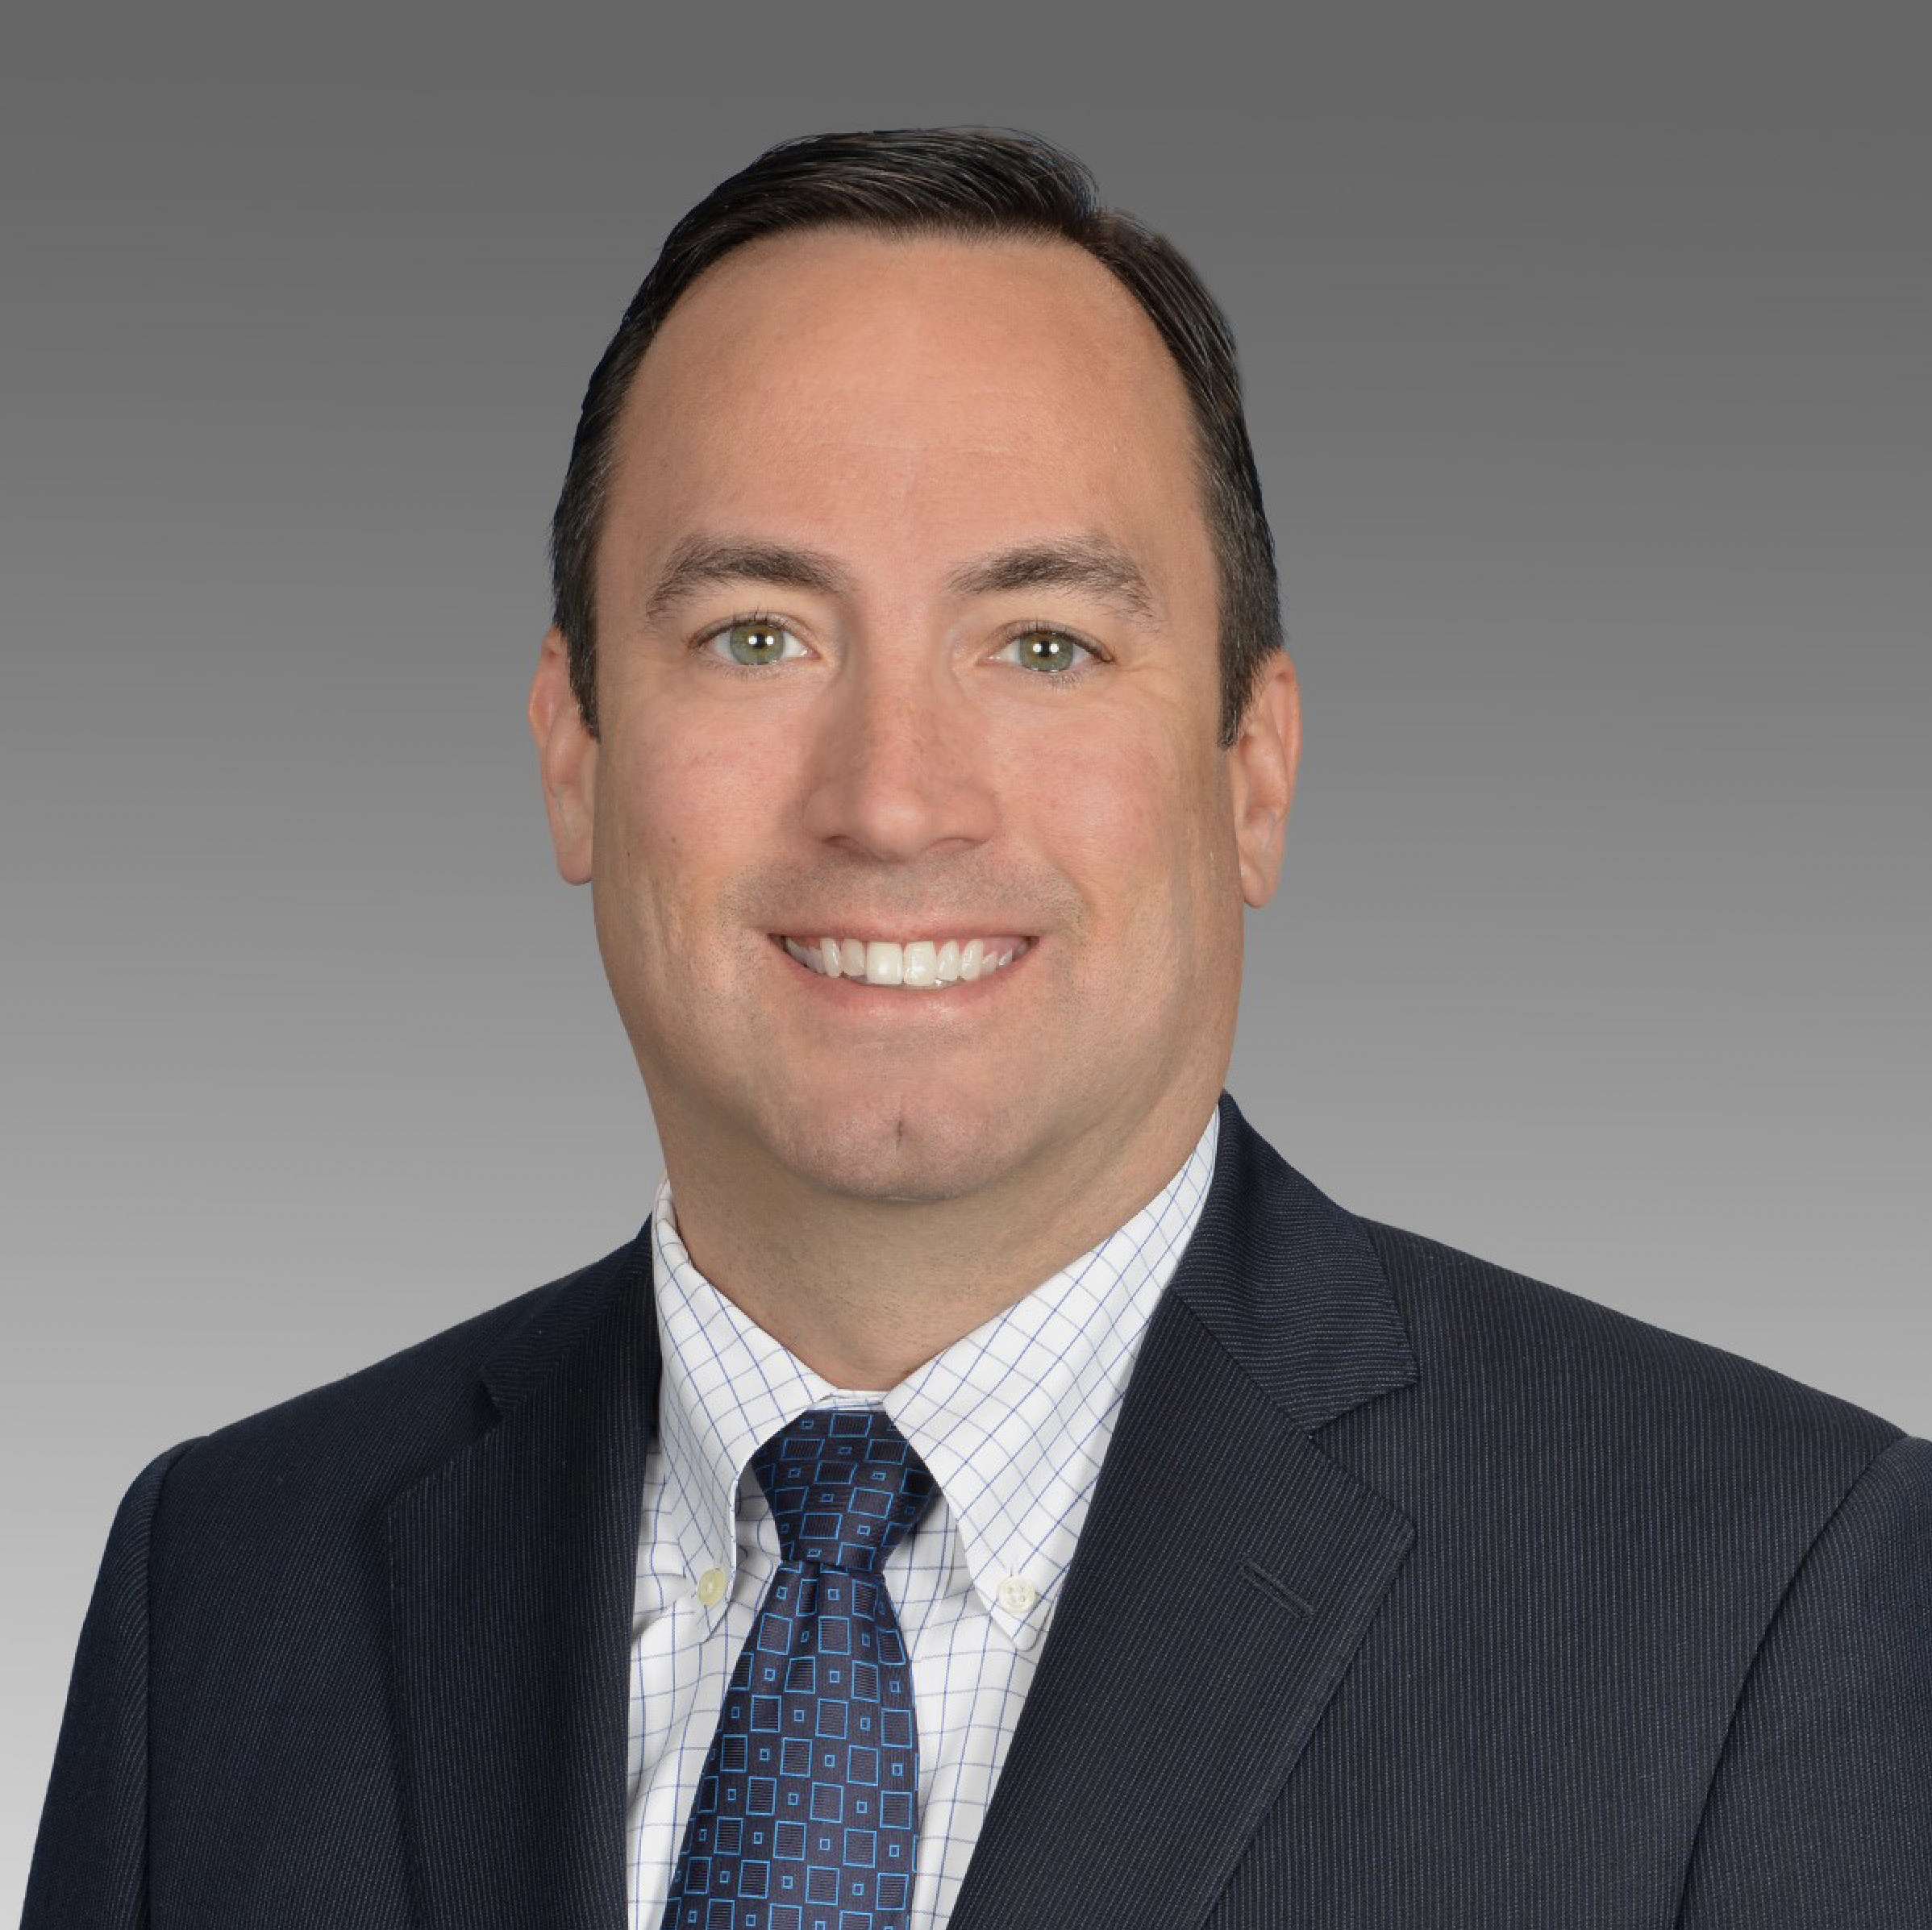 Flagstar Bank has hired Jason Lee to lead Flagstar's Secondary Marketing and Capital Markets operations